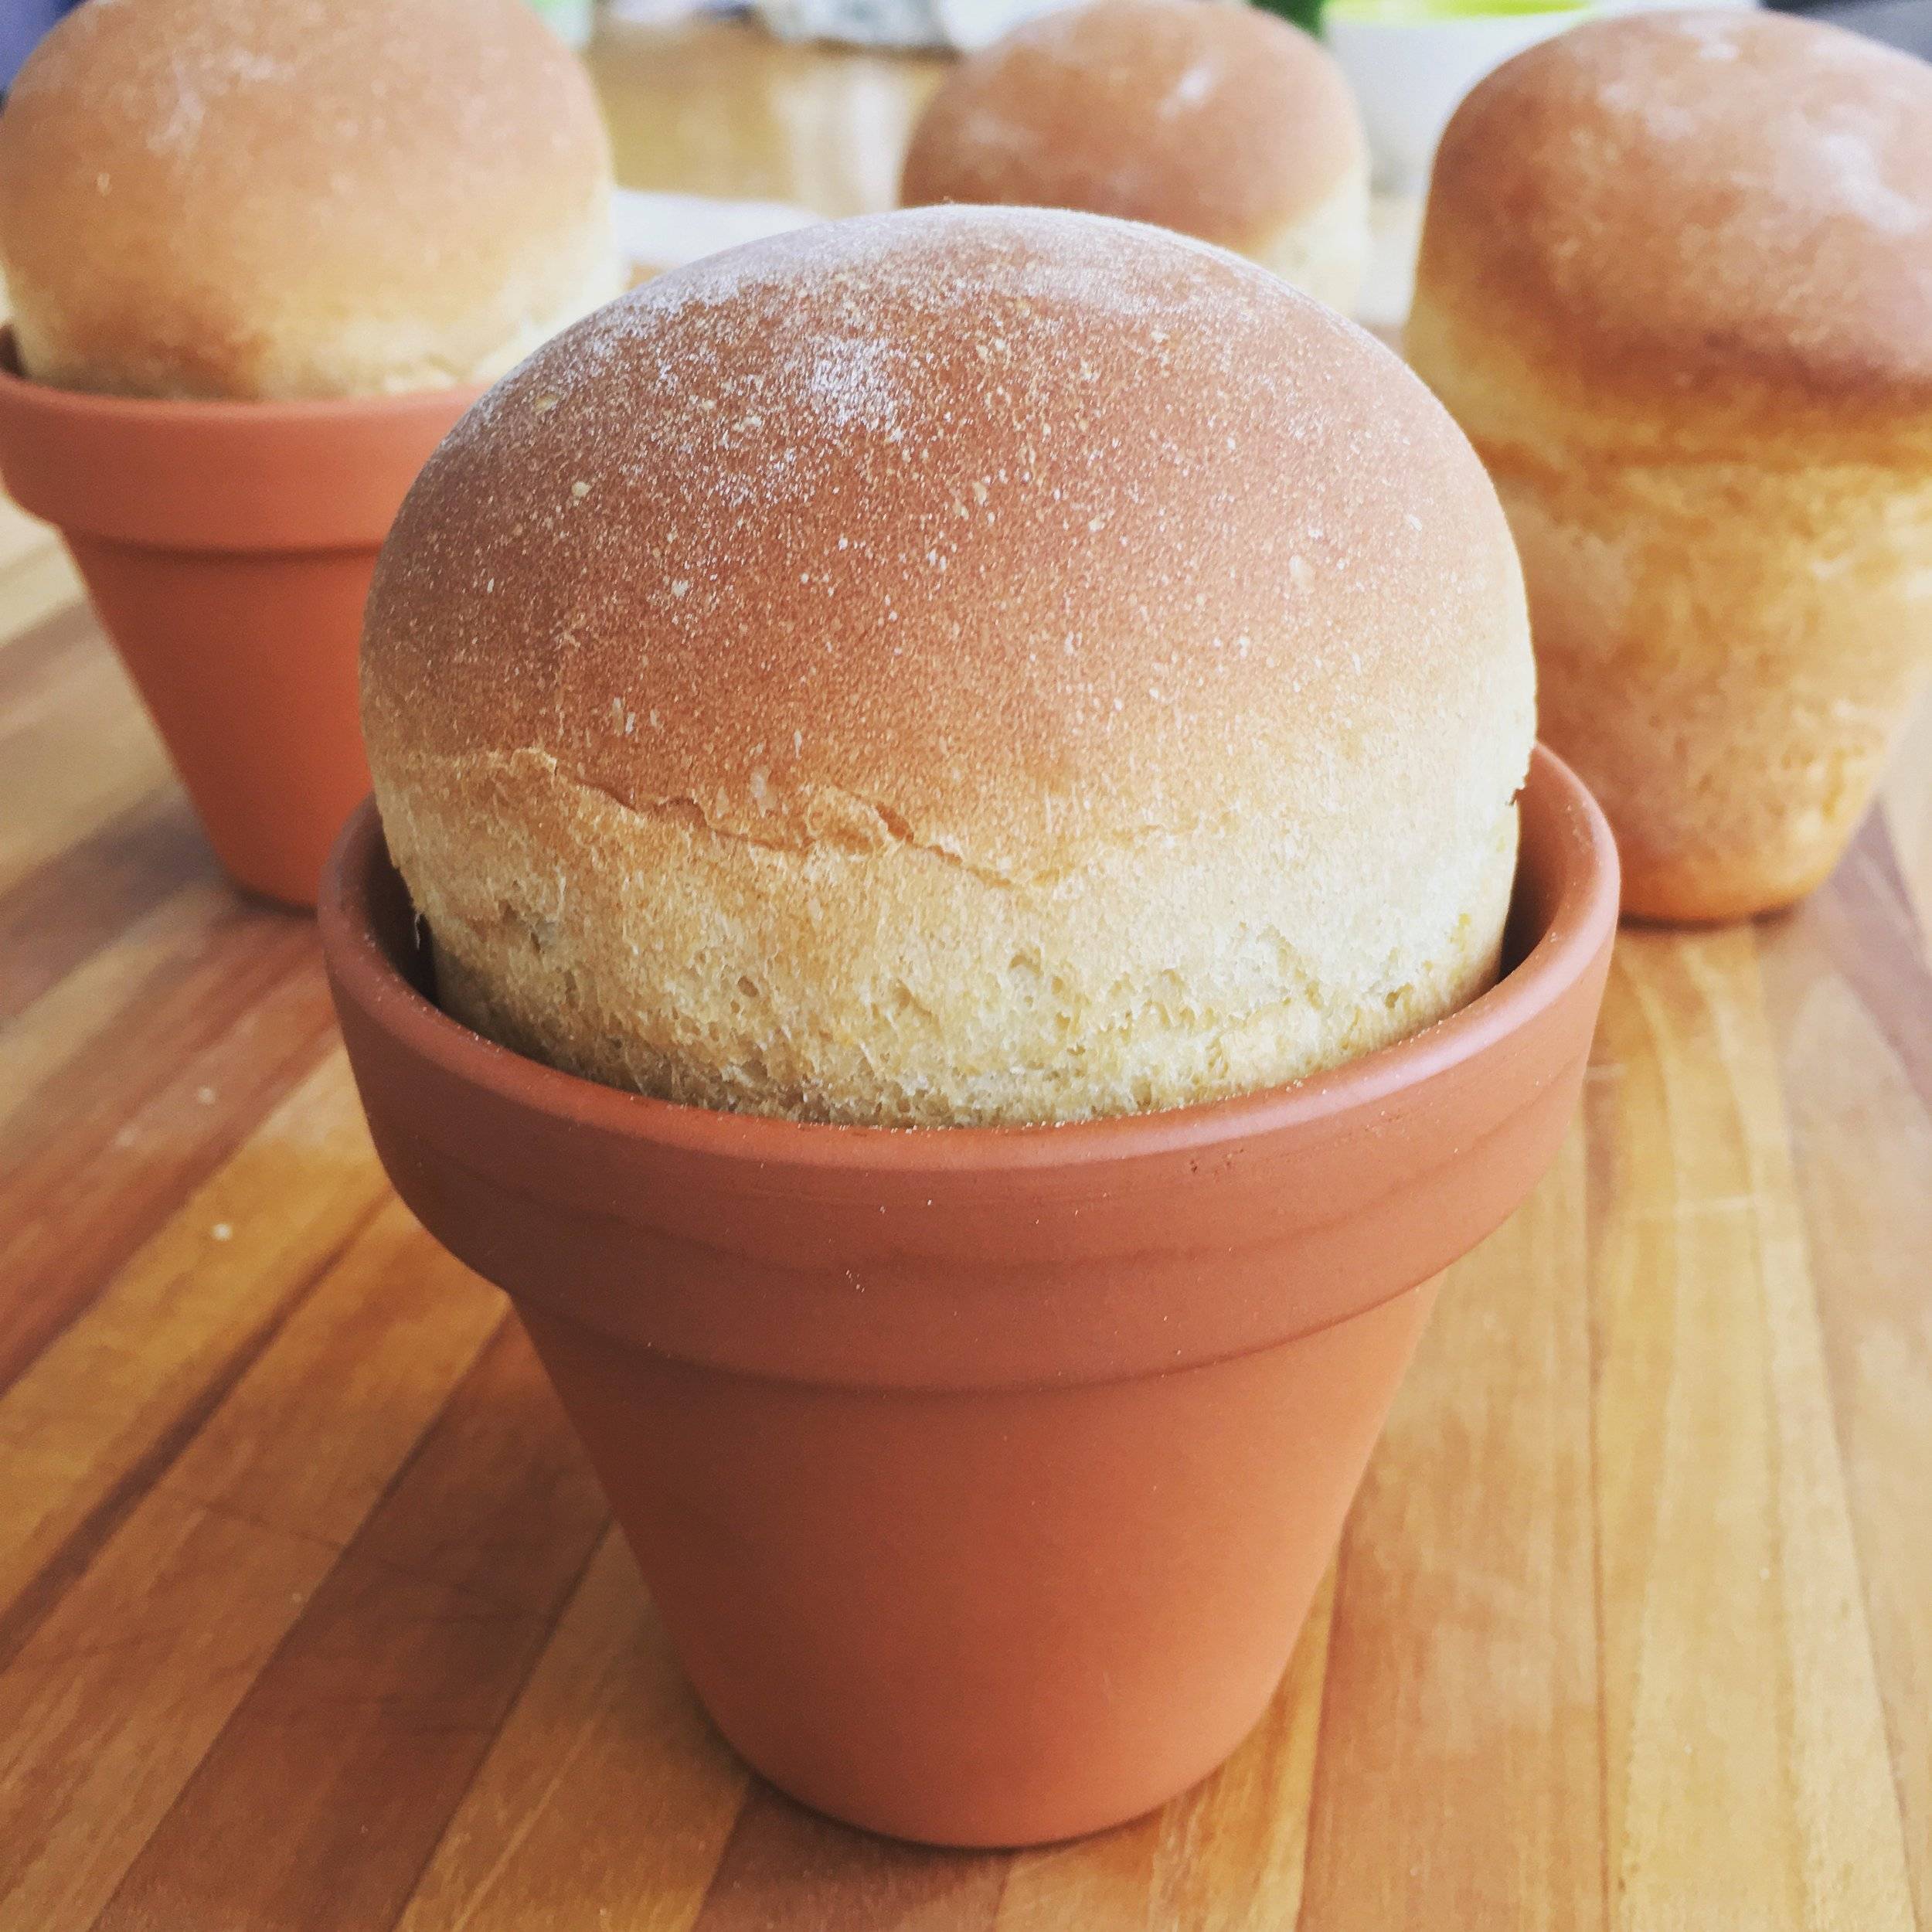 9. How to Make Flower Pot Bread